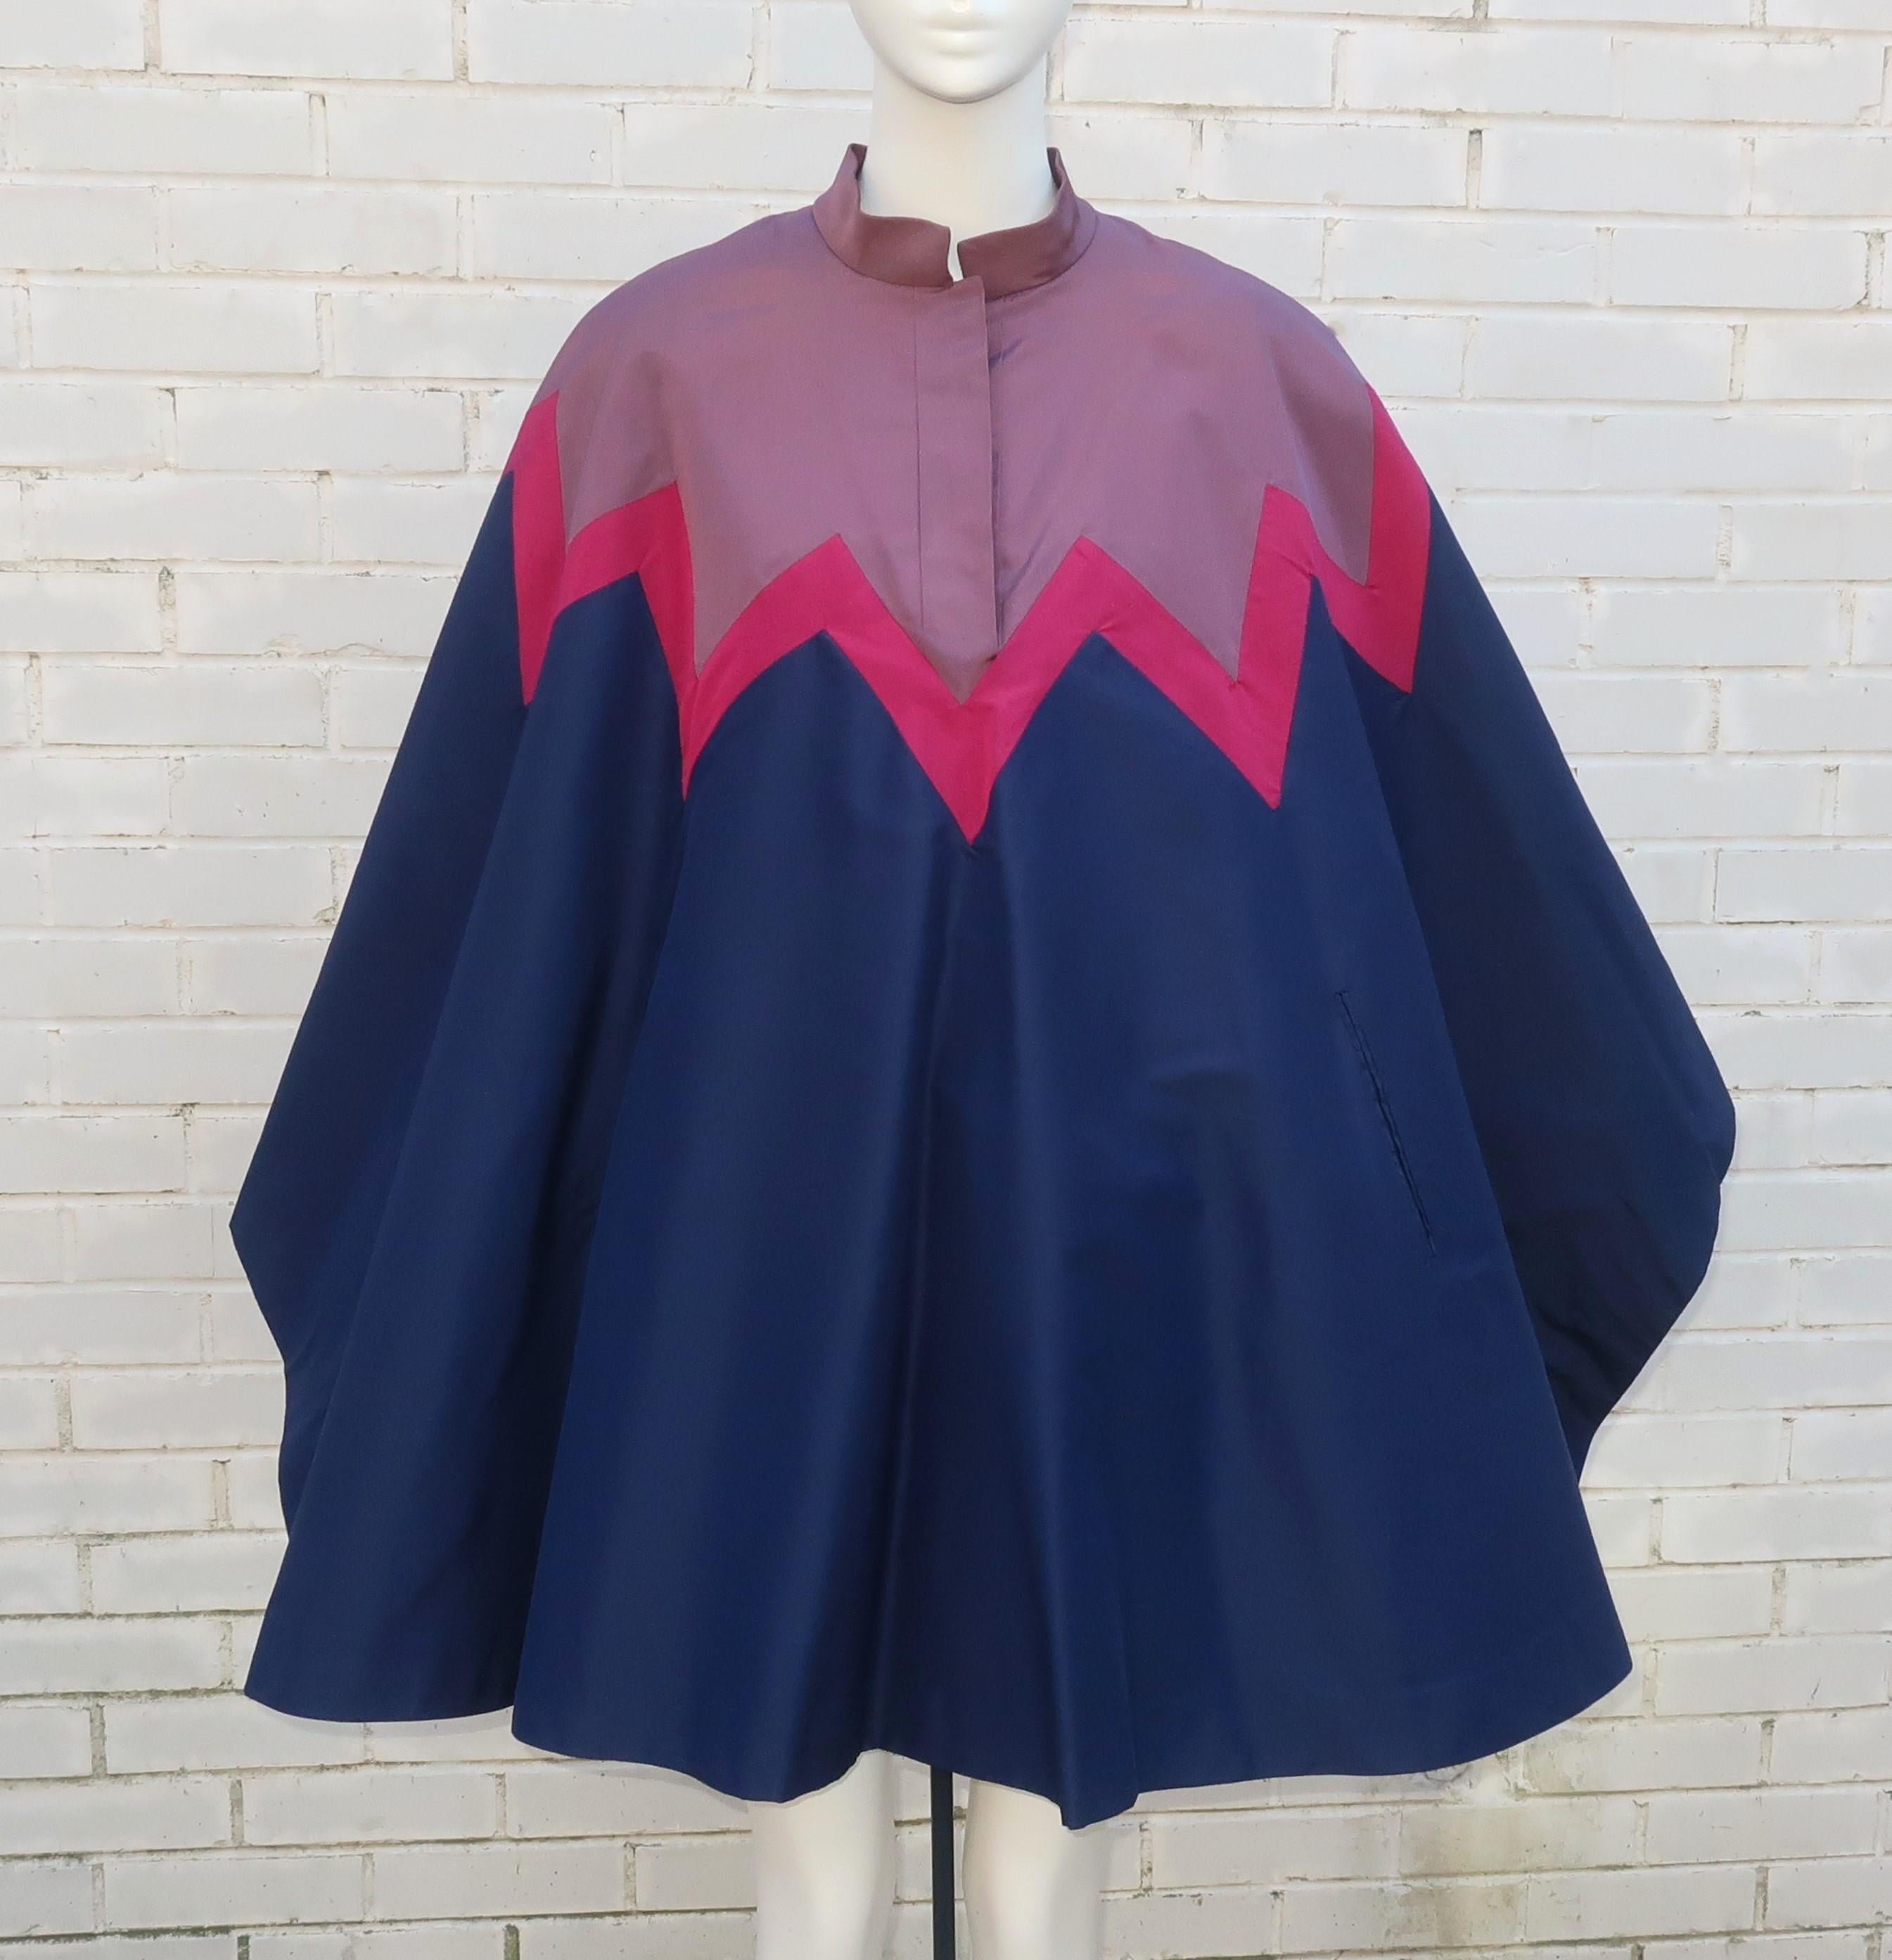 1970’s Italian silk faille cape with a luxurious sheared beaver fur lined interior.  The fur provides cozy warmth to this design while the silk outer is a fun combination of lilac mauve, magenta and blue with a chevron pattern.  The fur also sports